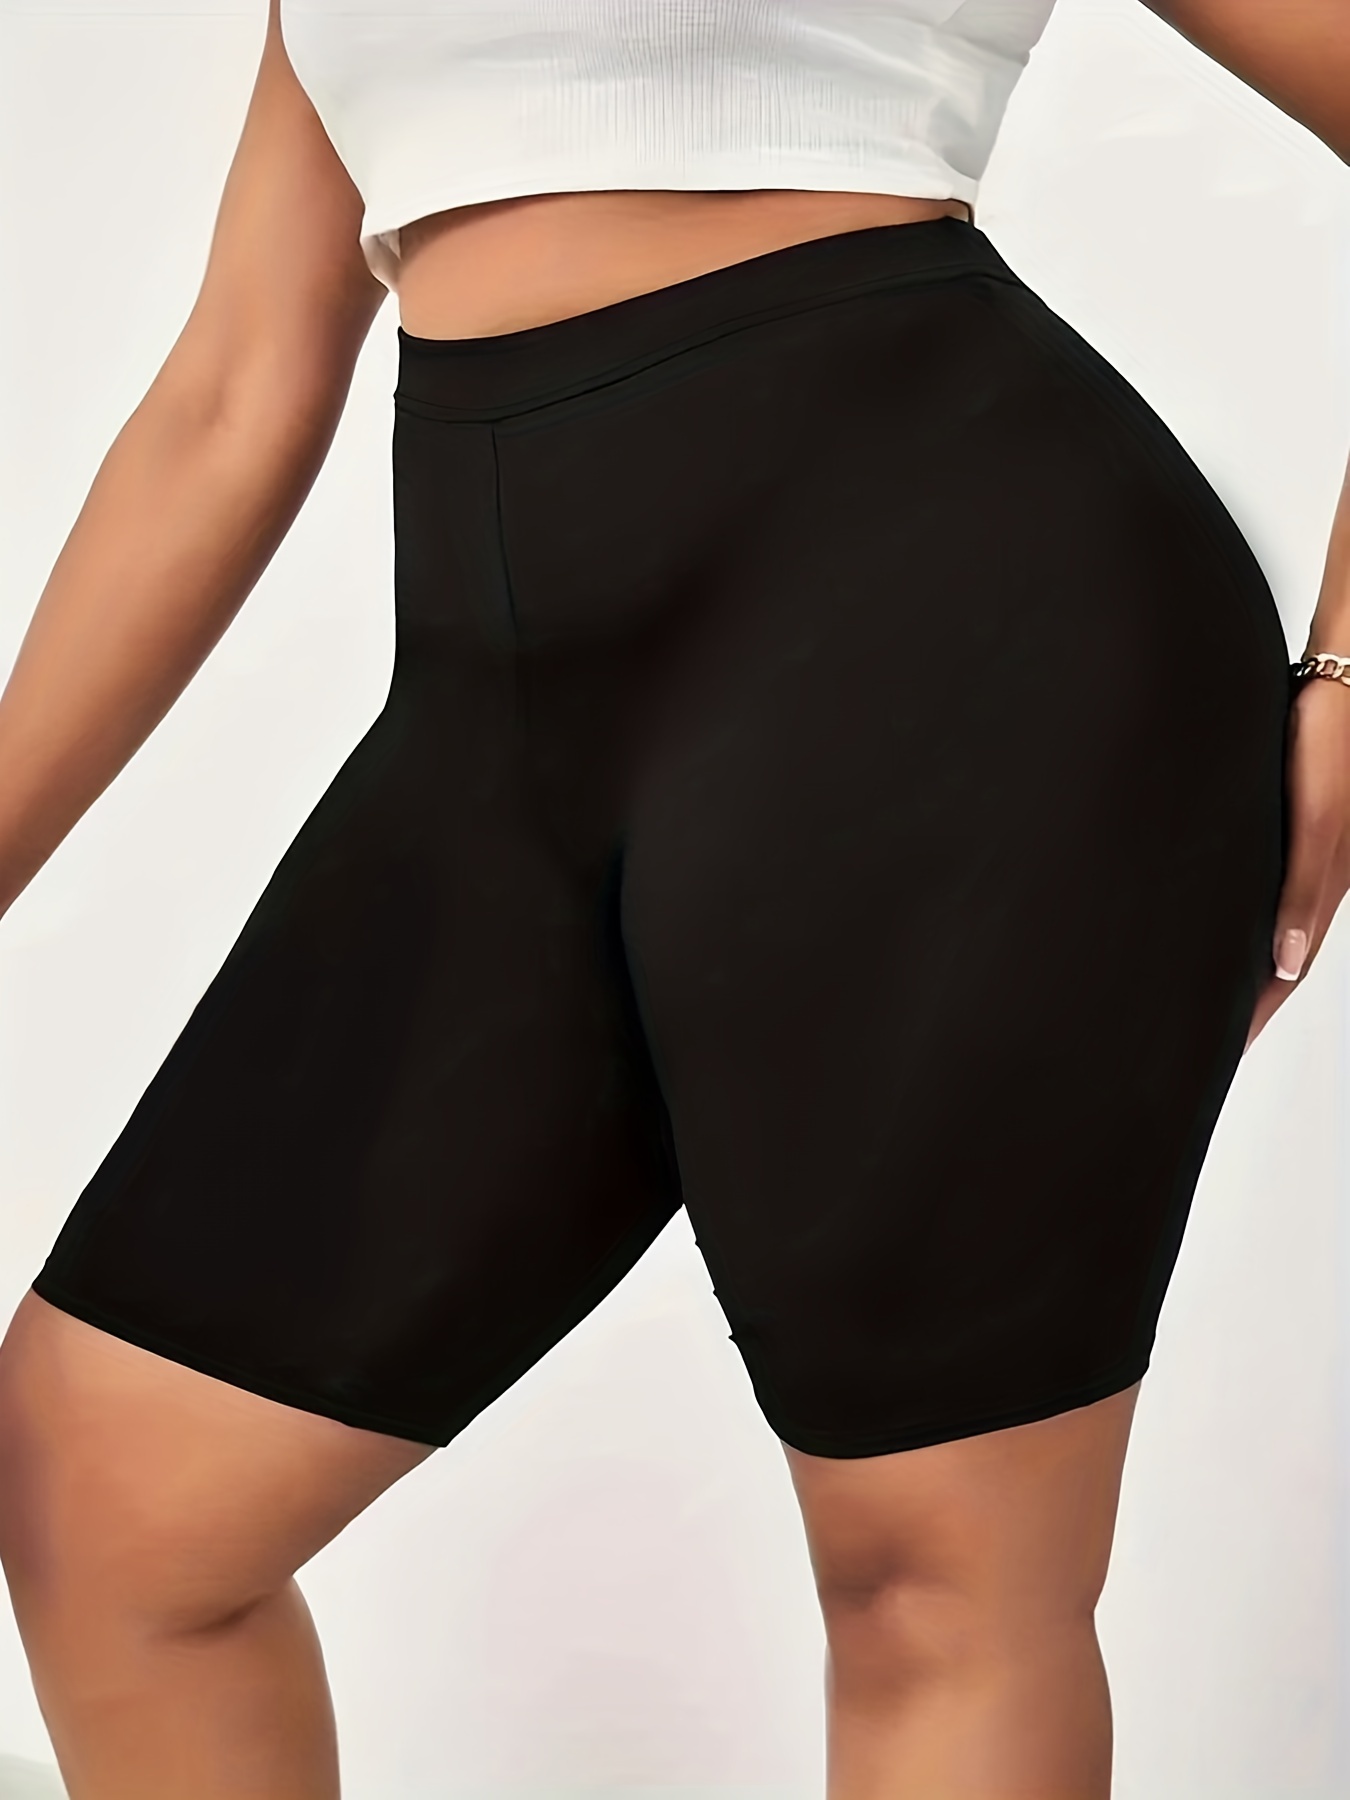 Reamphy 3 Pack Slip Shorts for Women Under Dress,Comfortable